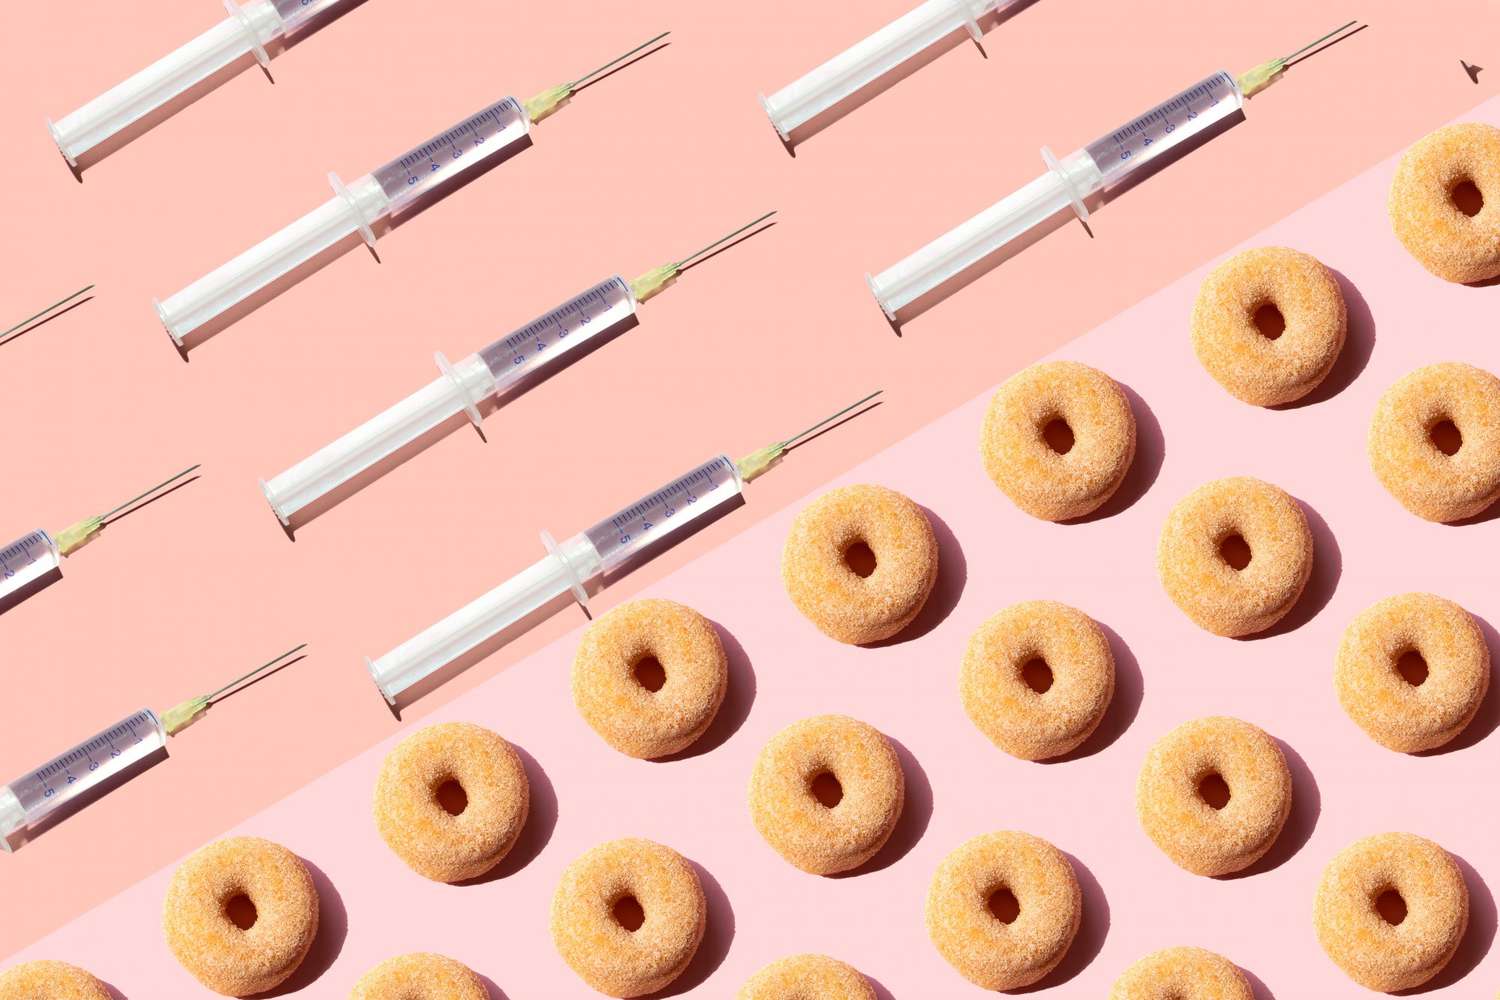 covid-vaccine-free-stuff: syringes and donuts